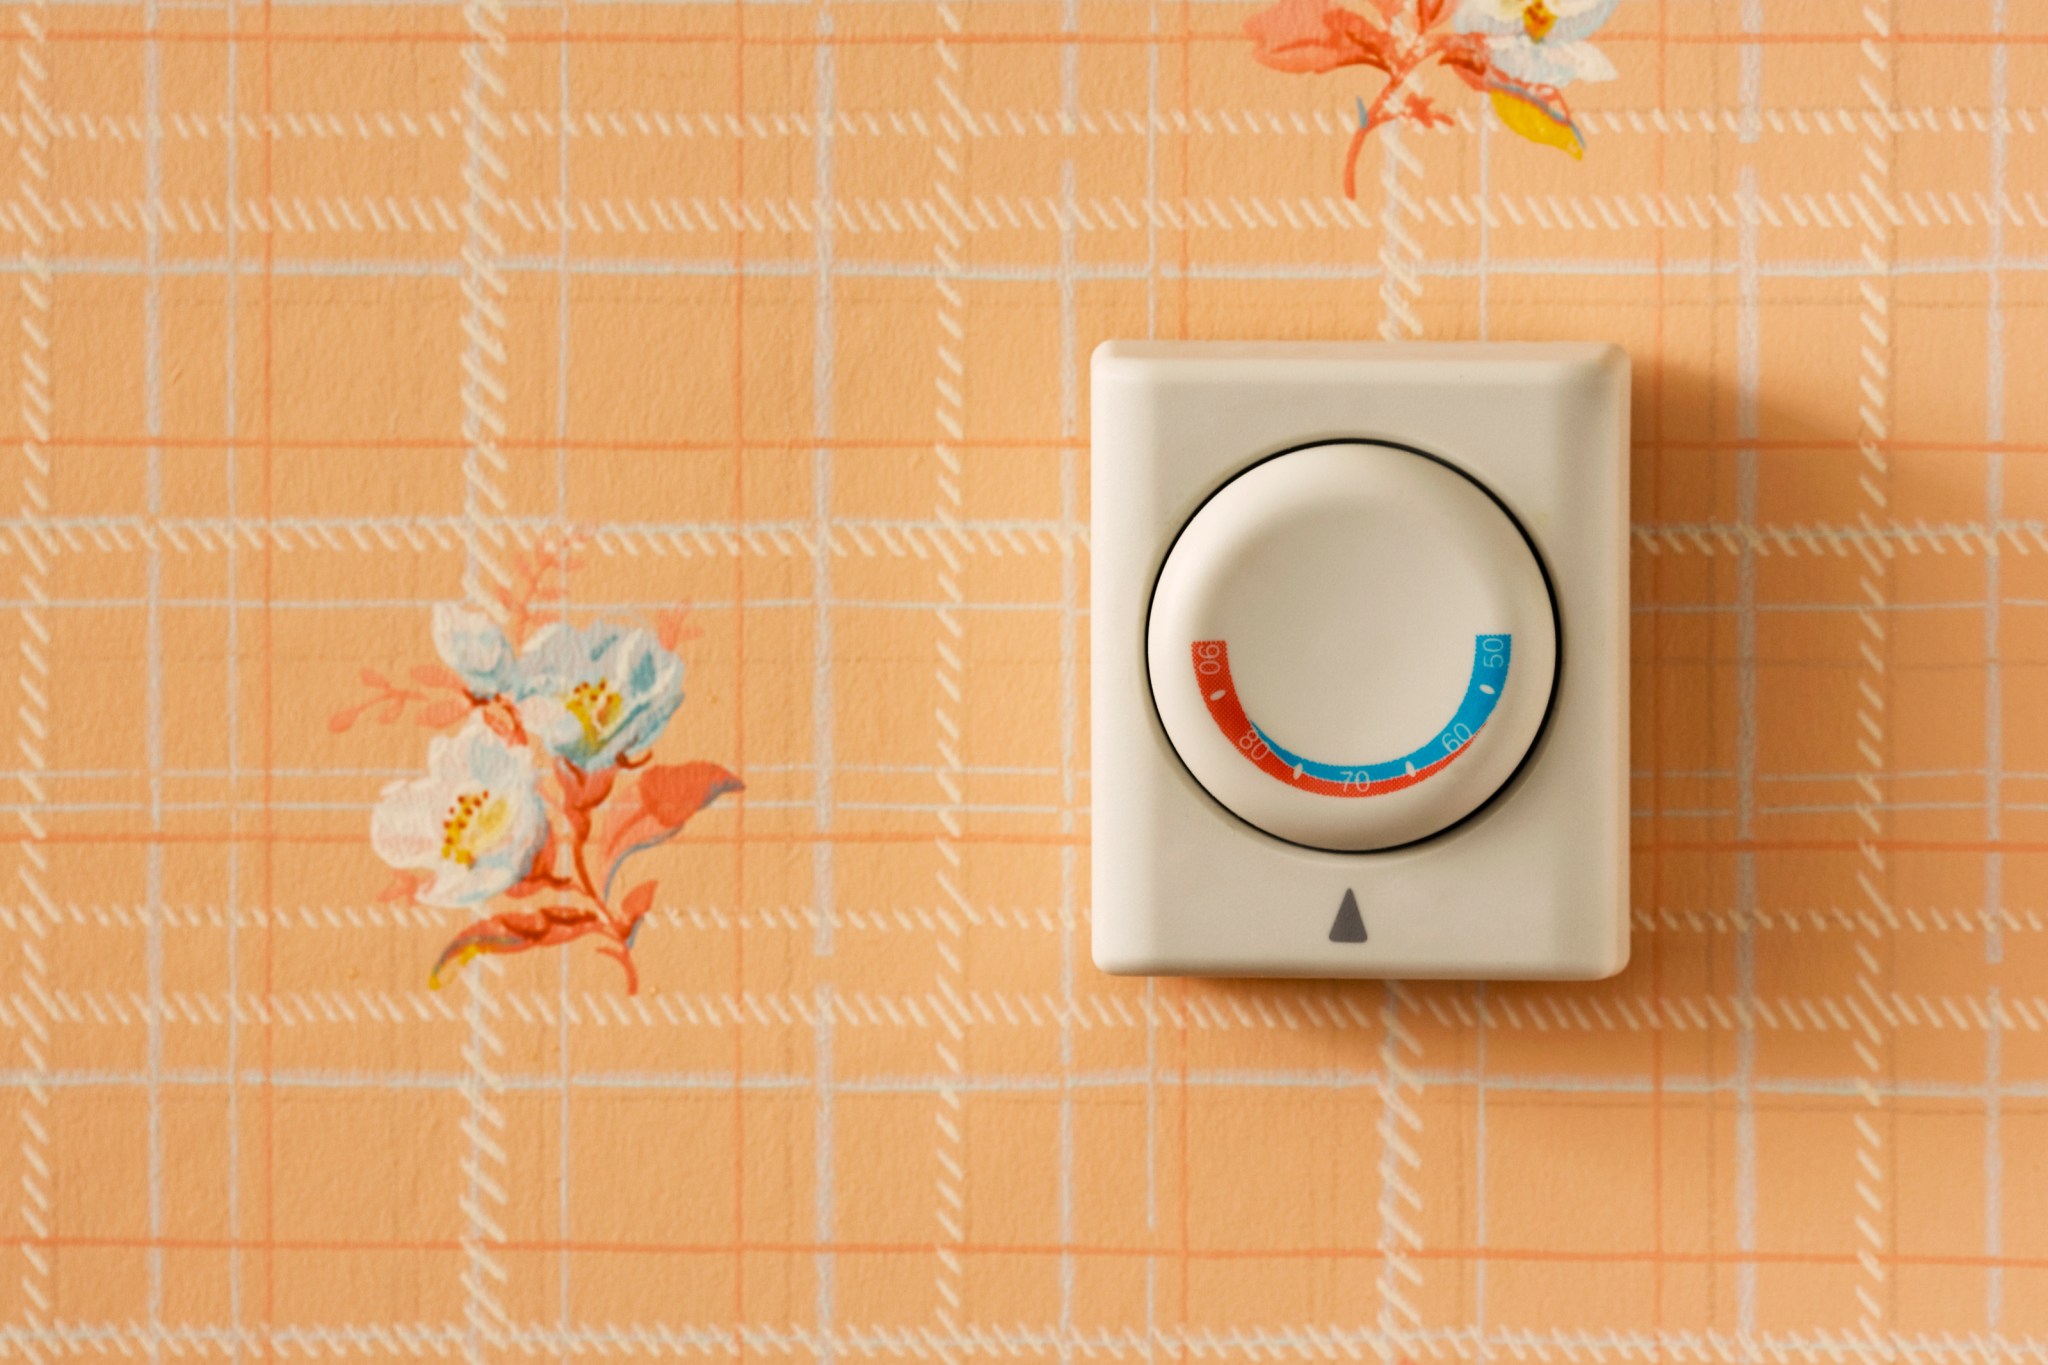 common easy home mistakes old thermostat on peach and floral wallpaper